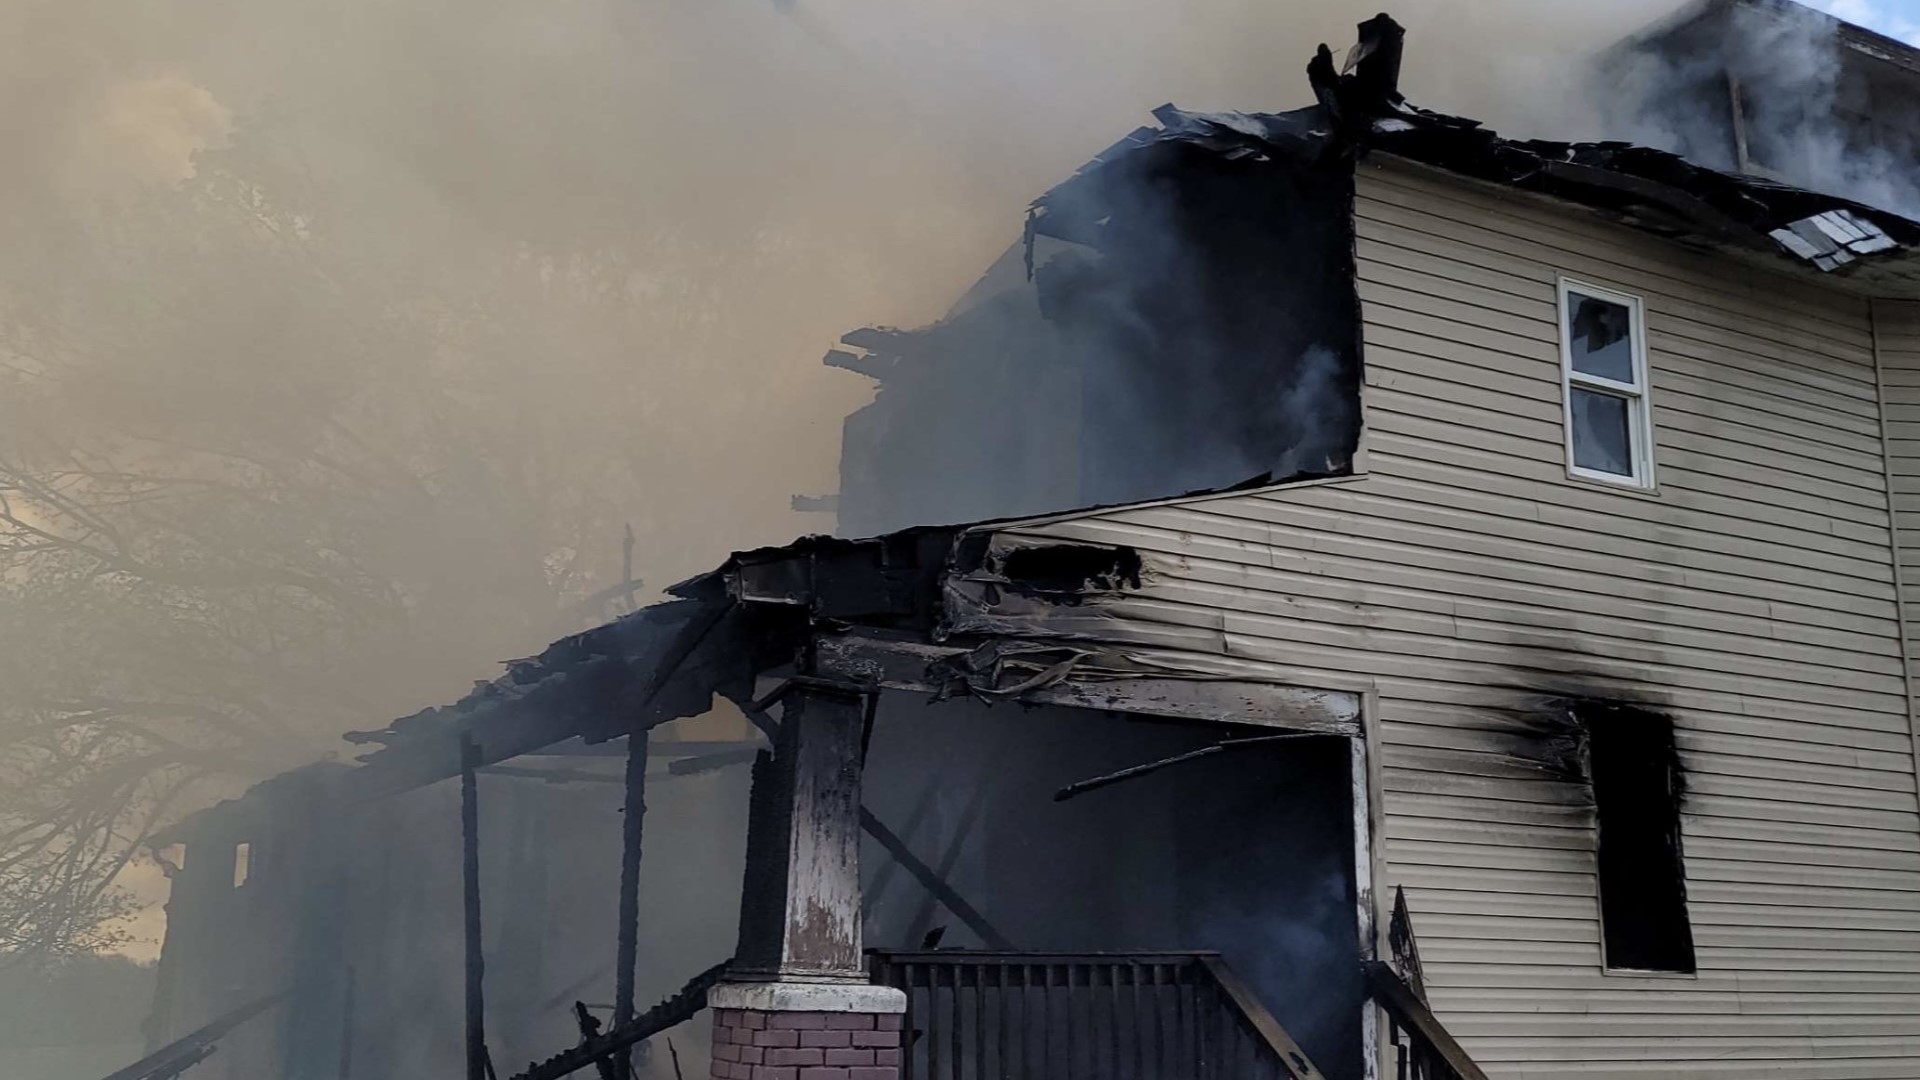 Fire investigators believe a stove in the basement started the flames that destroyed a Lower Chanceford Township home on Tuesday.